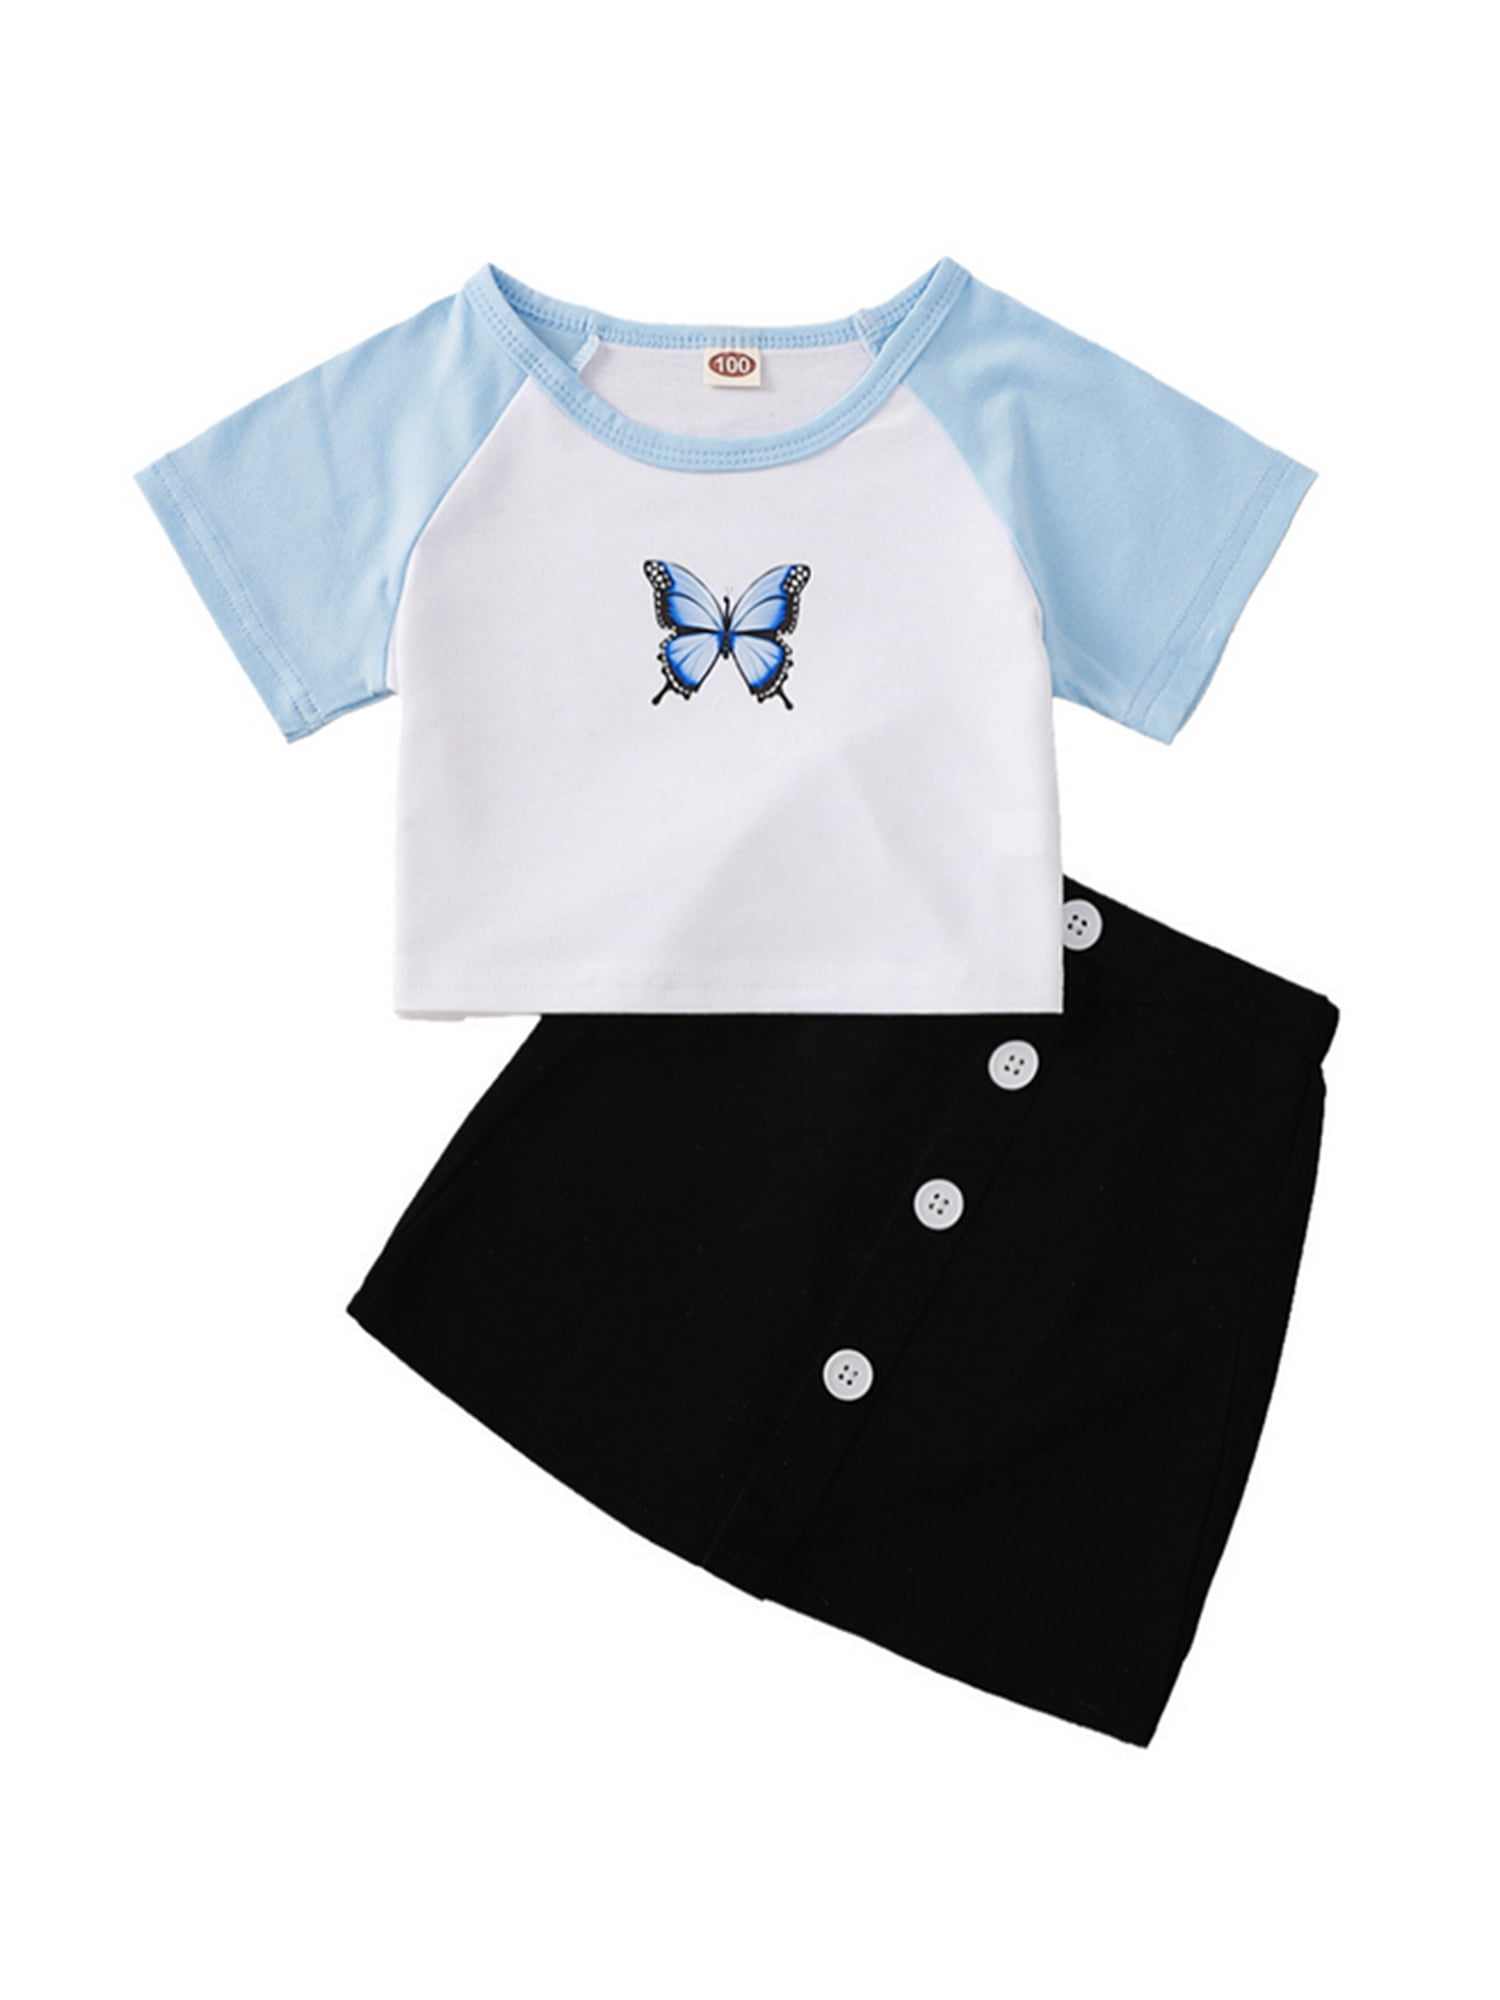 N/AA Toddler Baby Girls Butterfly Print Outfits Short Sleeve T-Shirt Tops+Botton A-Line Skirt 2pcs Suits 